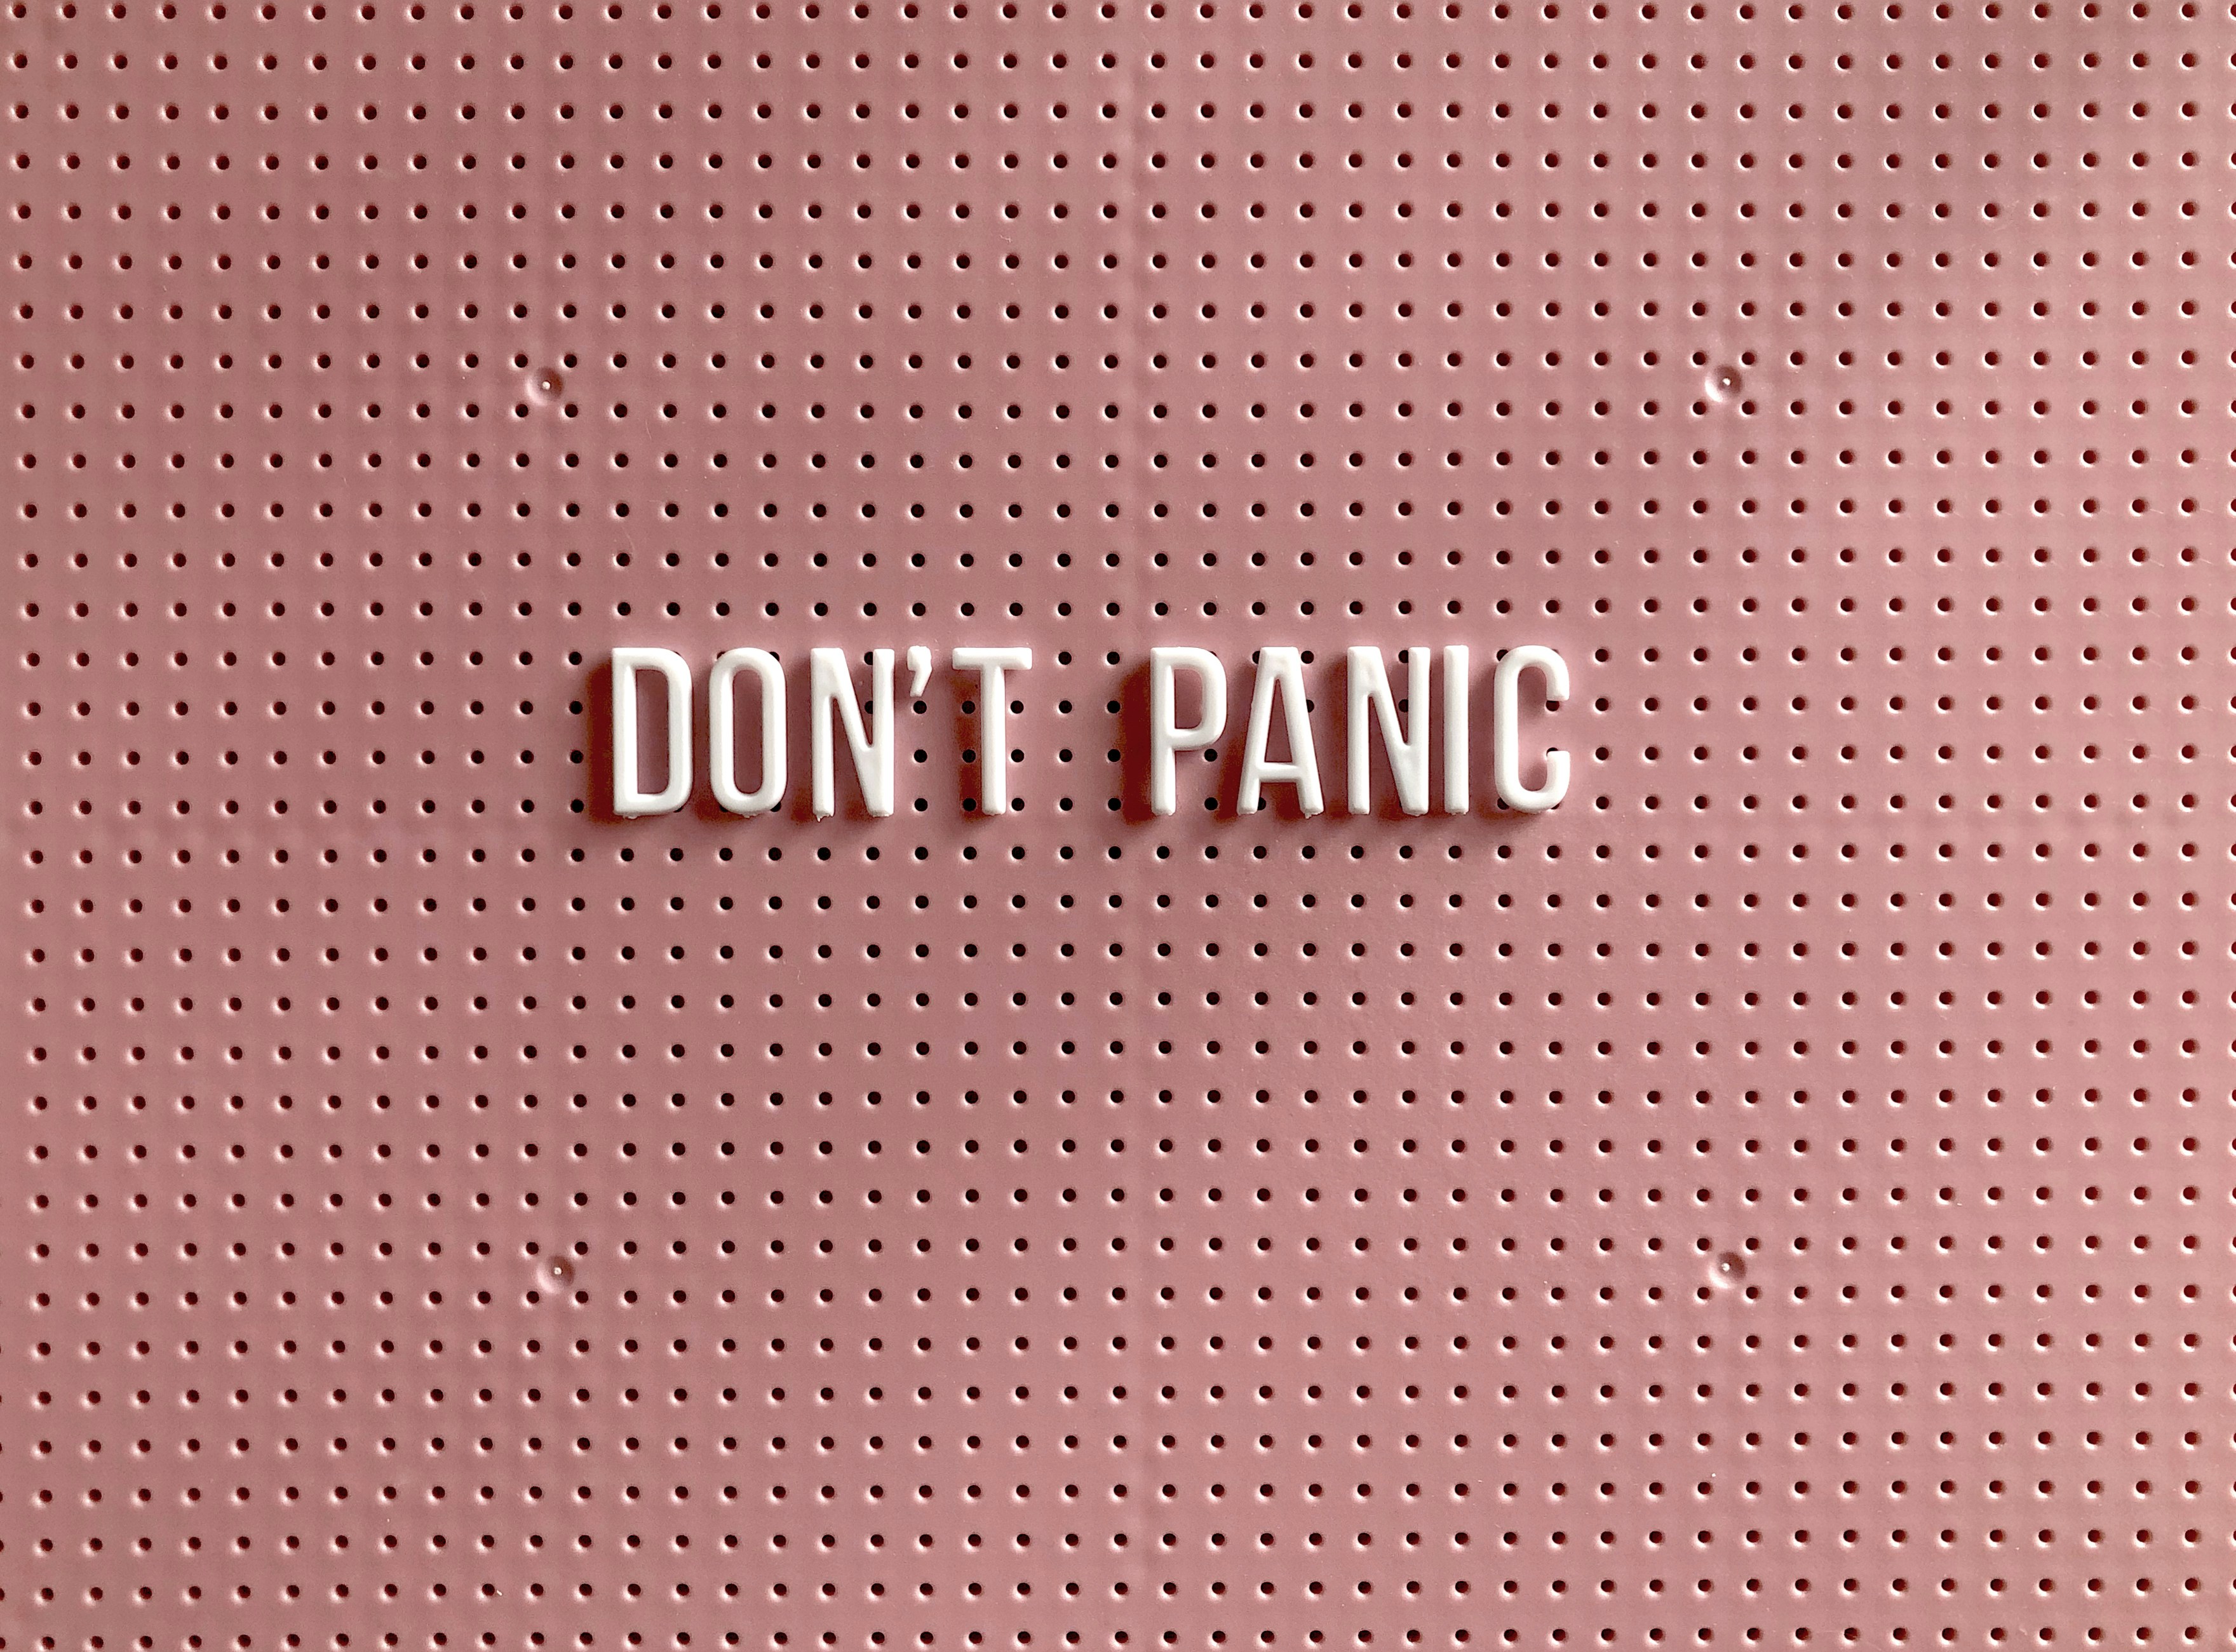 Attack of the Panic – My Panic Attack Experience